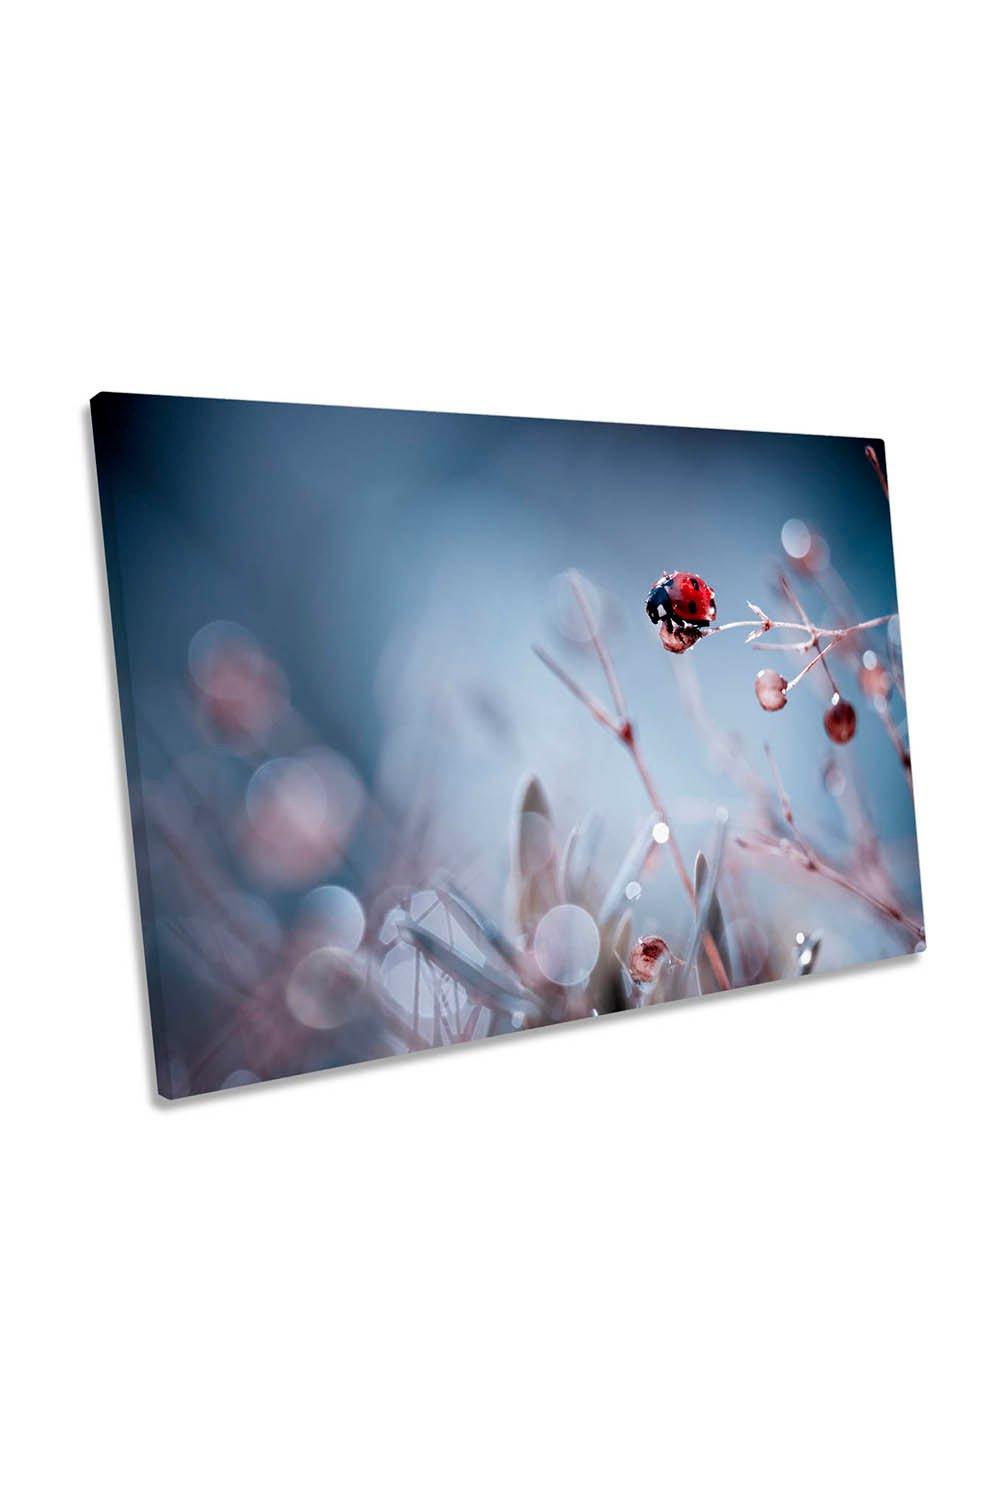 High Diving Ladybird Flowers Floral Canvas Wall Art Picture Print